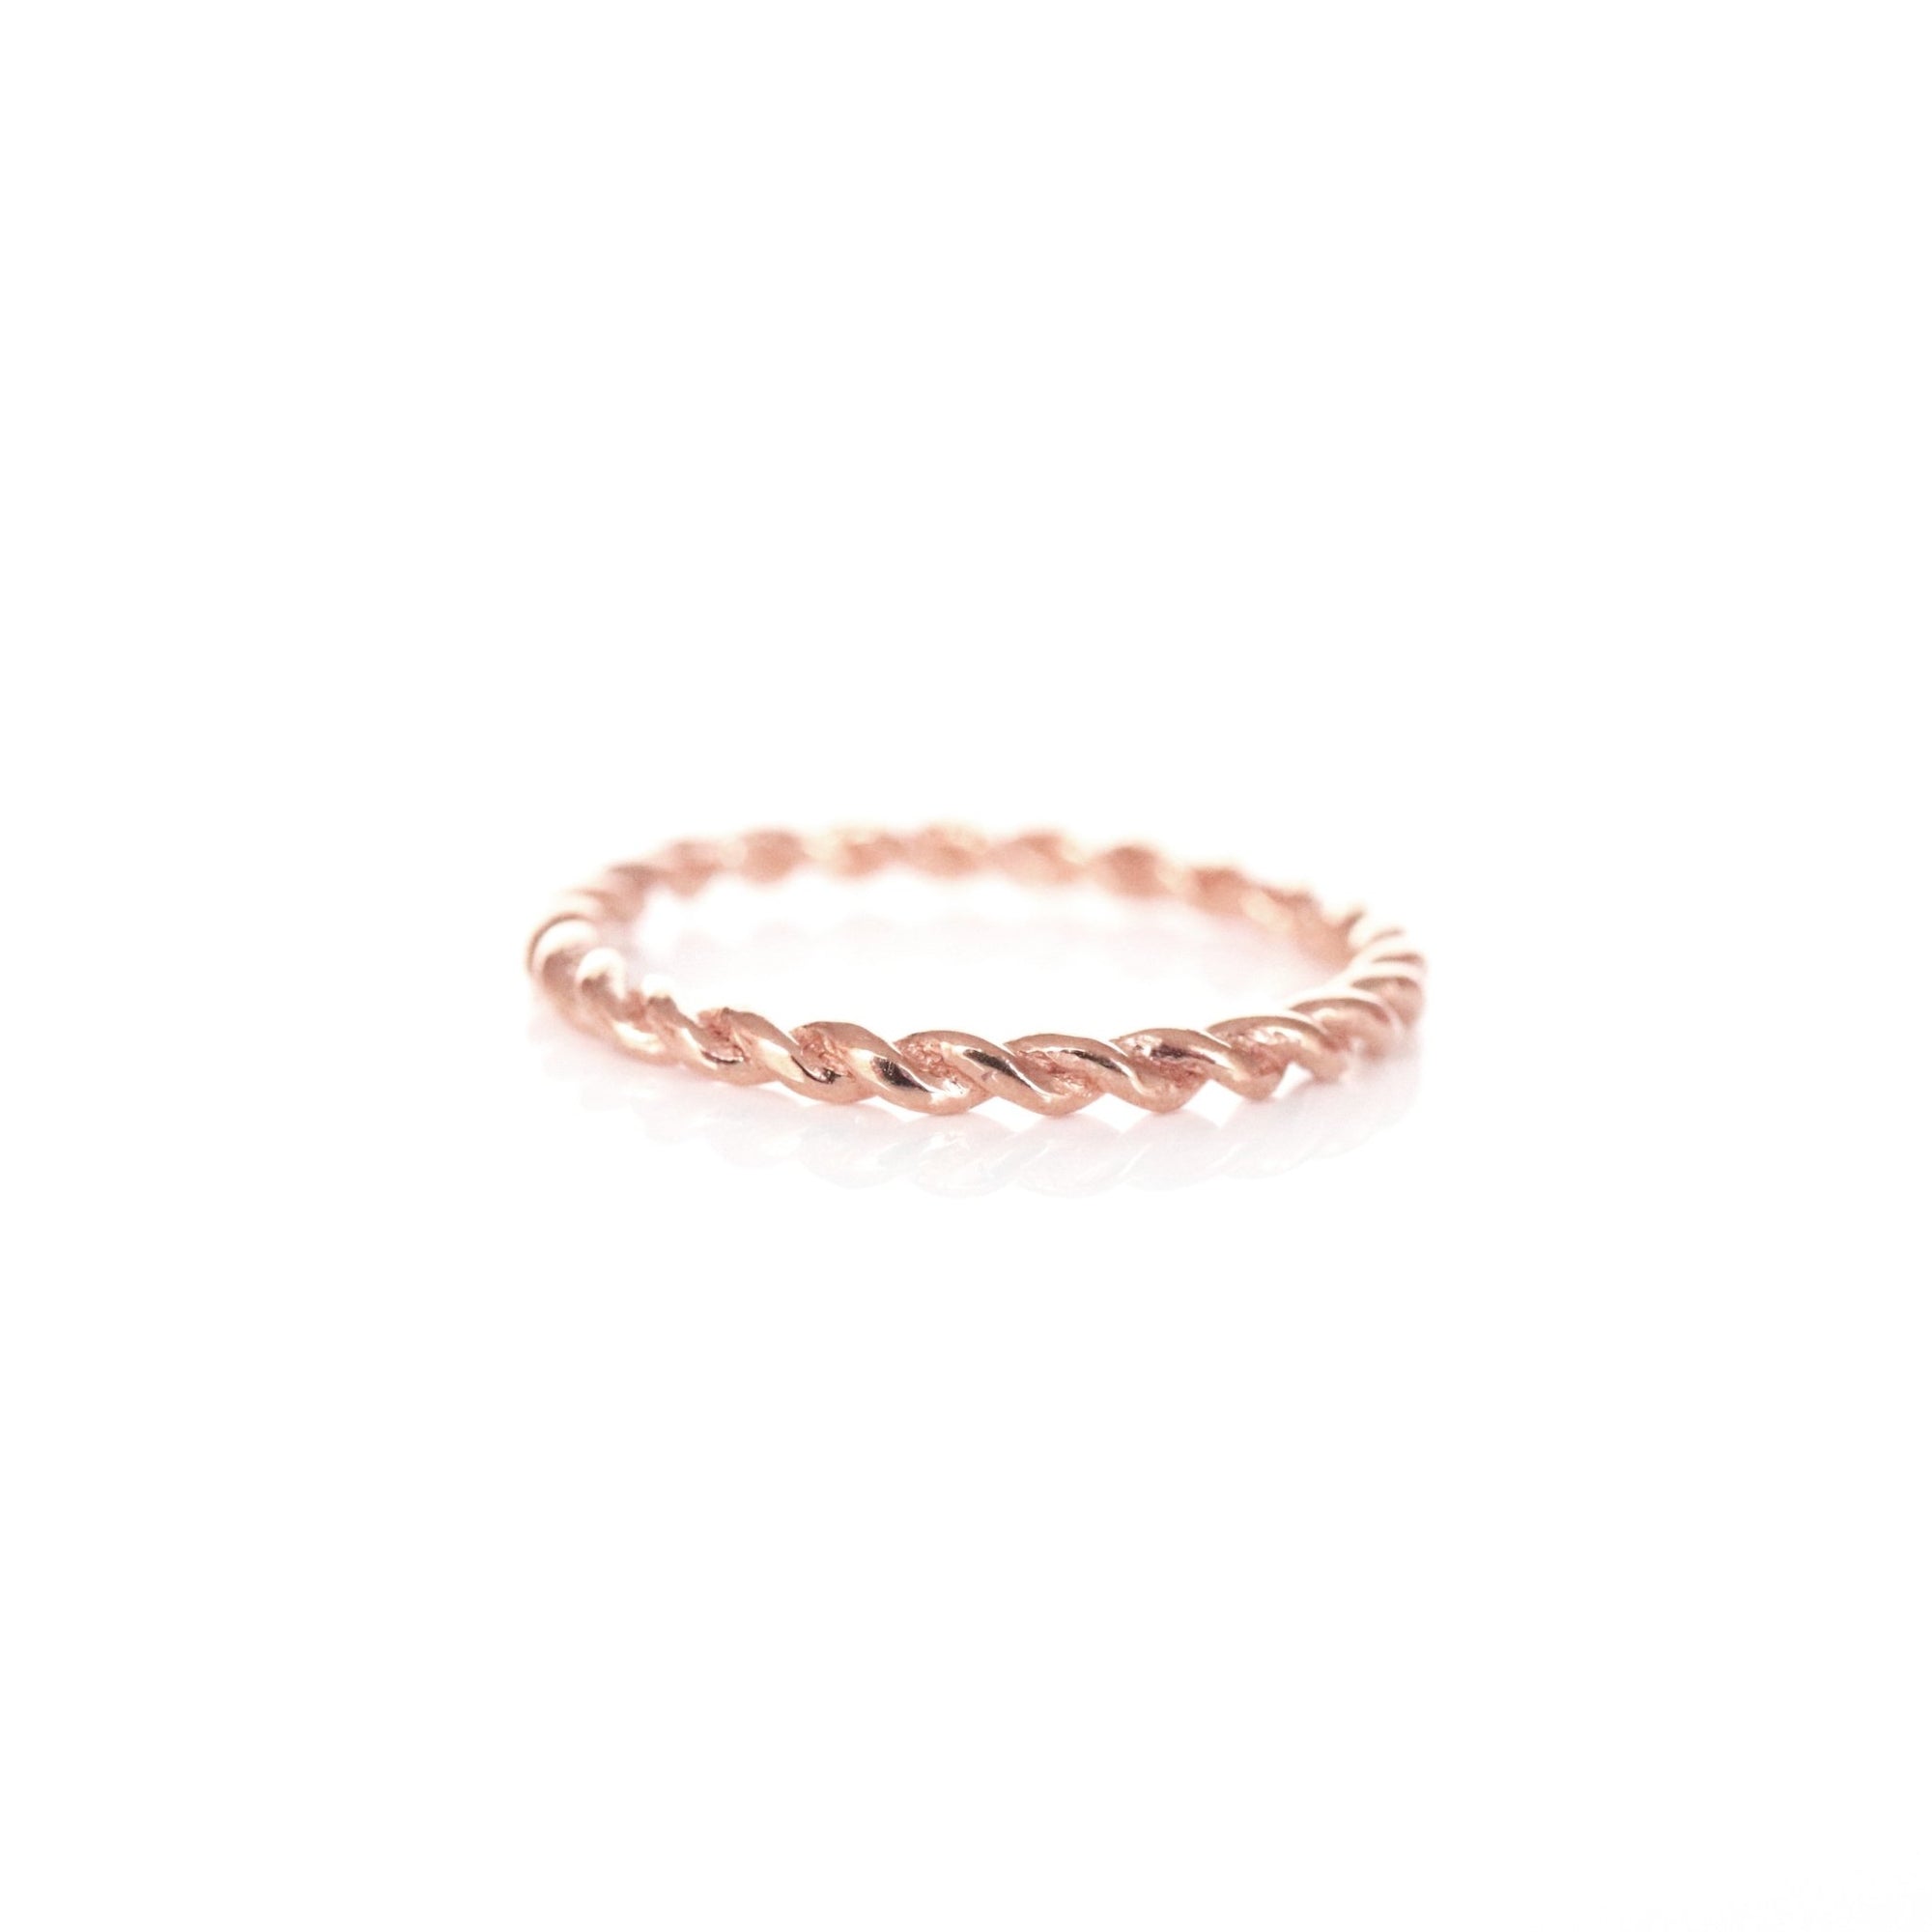 POISE THIN CABLE LINK BAND RING - ROSE GOLD - SO PRETTY CARA COTTER